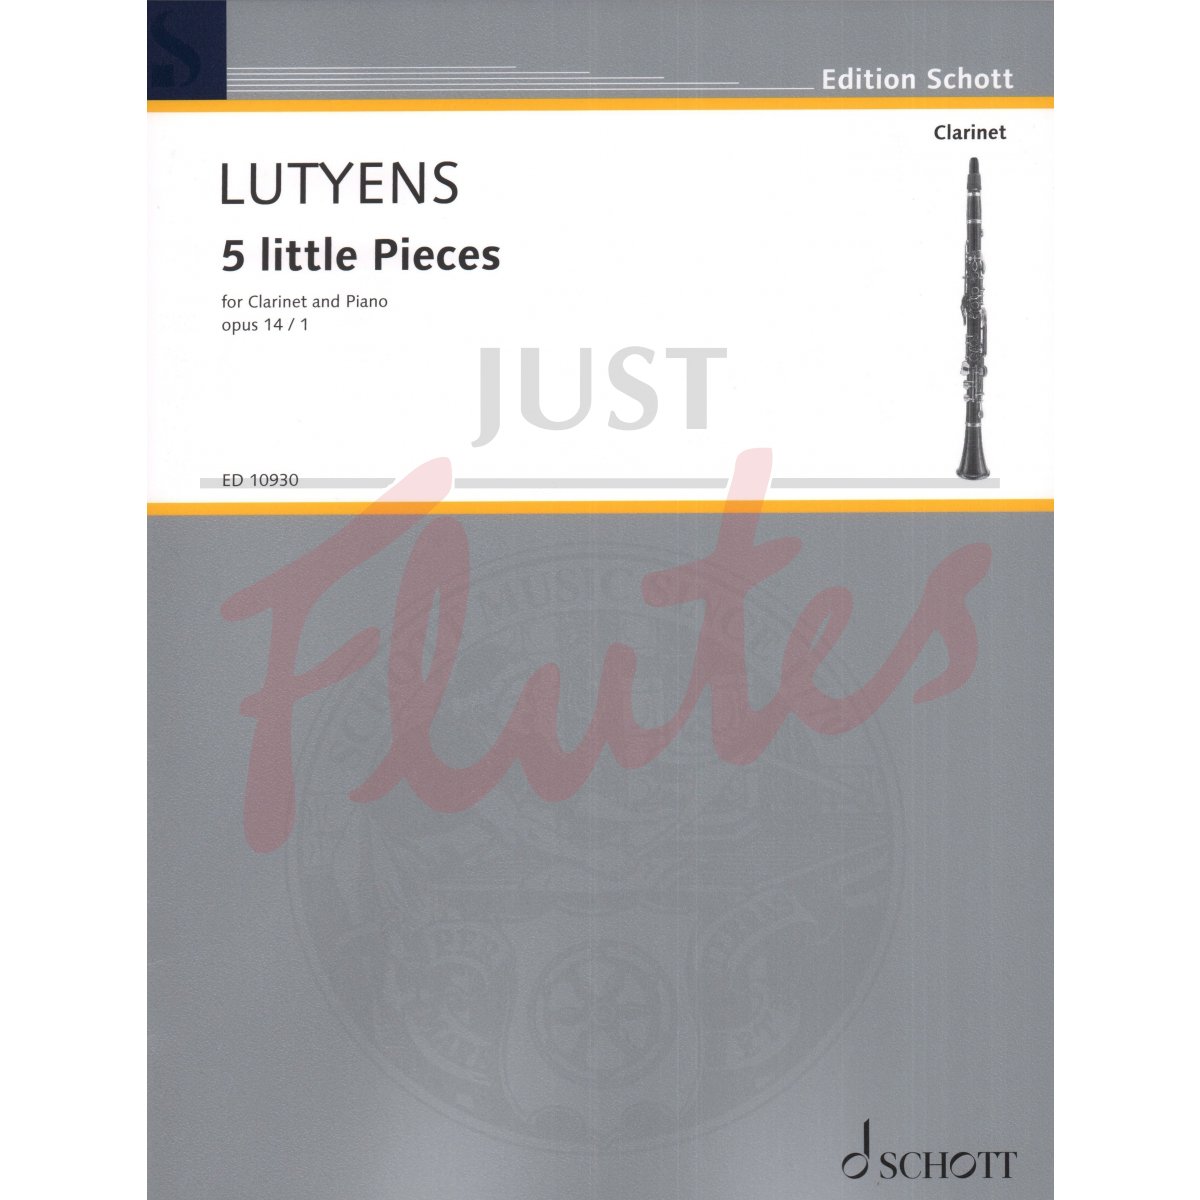 Five Little Pieces for Clarinet and Piano